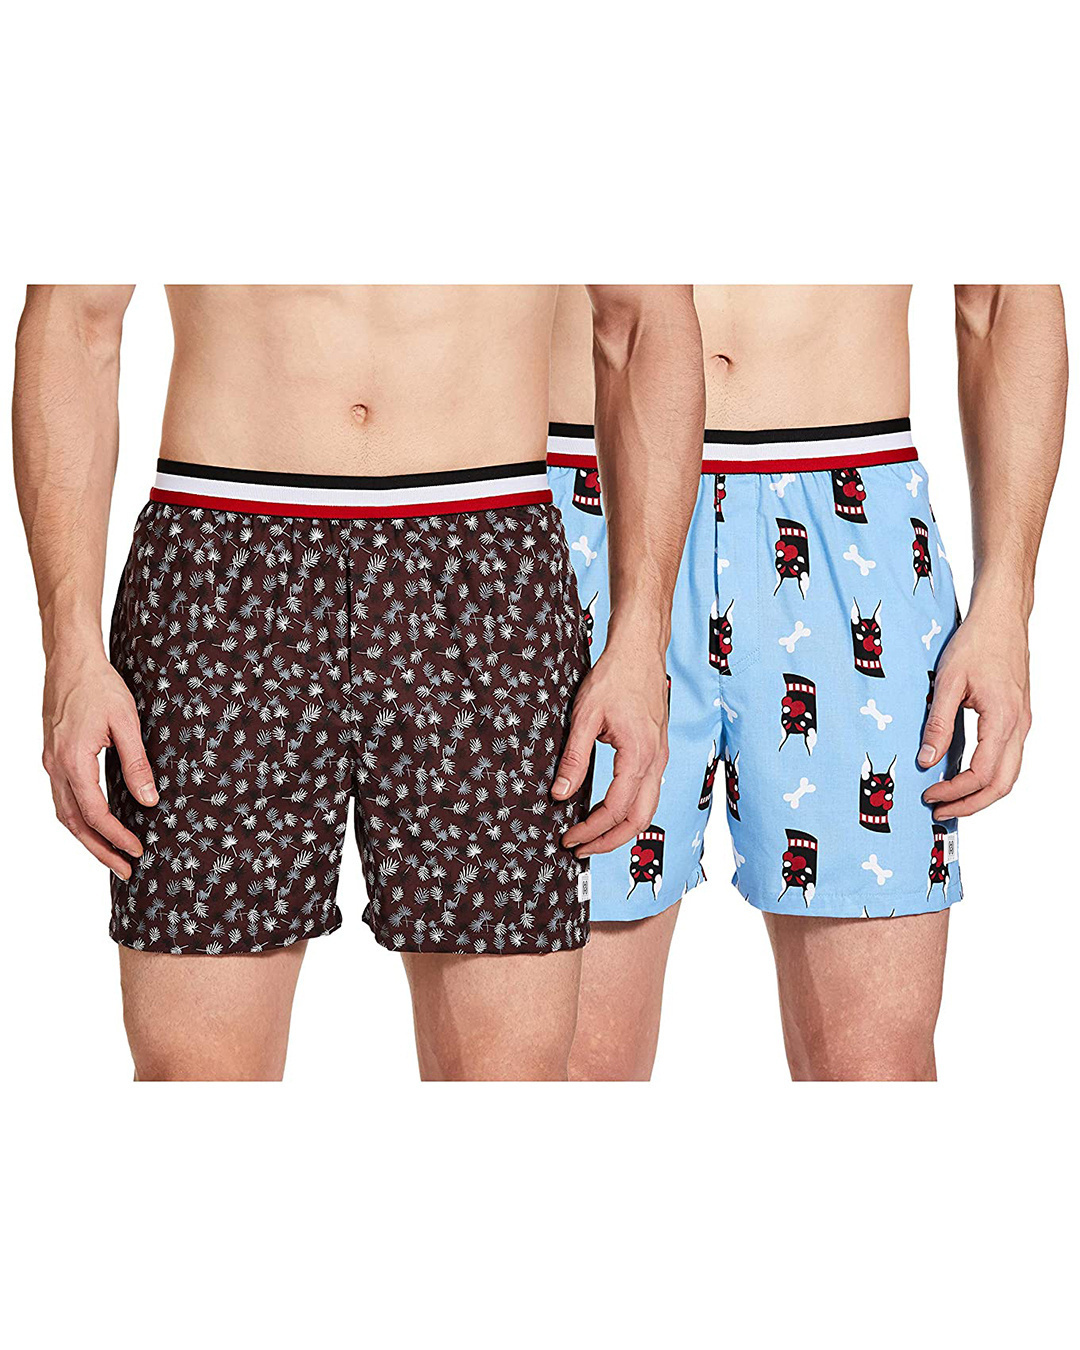 Buy Men's All Over Printed Cotton Boxers (Pack of 3) Online in India at ...